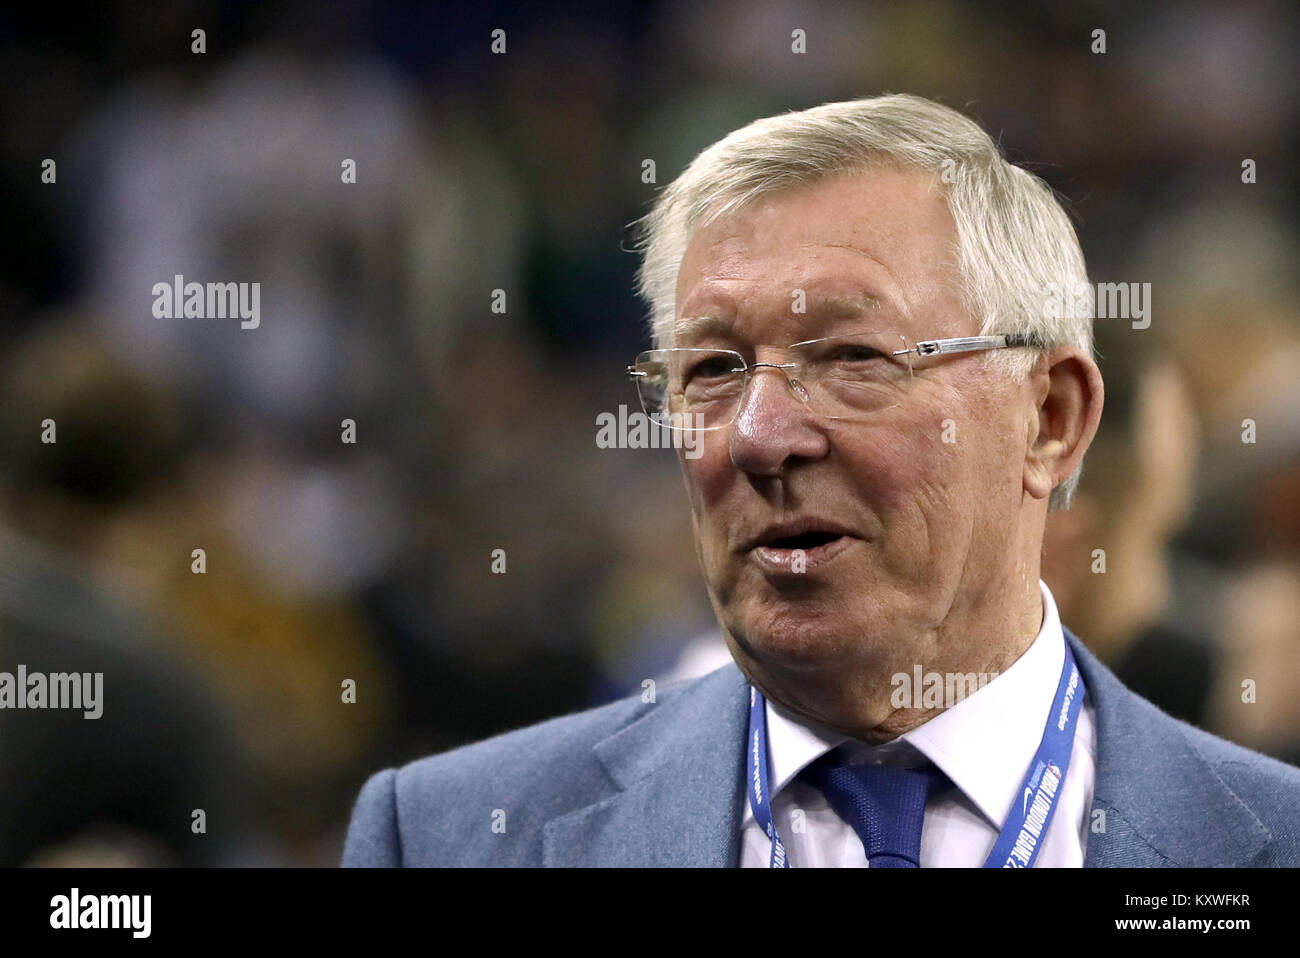 Sir Alex Ferguson in the crowd during the NBA London Game 2018 at the O2 Arena, London. PRESS ASSOCIATION Photo. Picture date: Thursday January 11, 2018. See PA story BASKETBALL London. Photo credit should read: Simon Cooper/PA Wire. Stock Photo